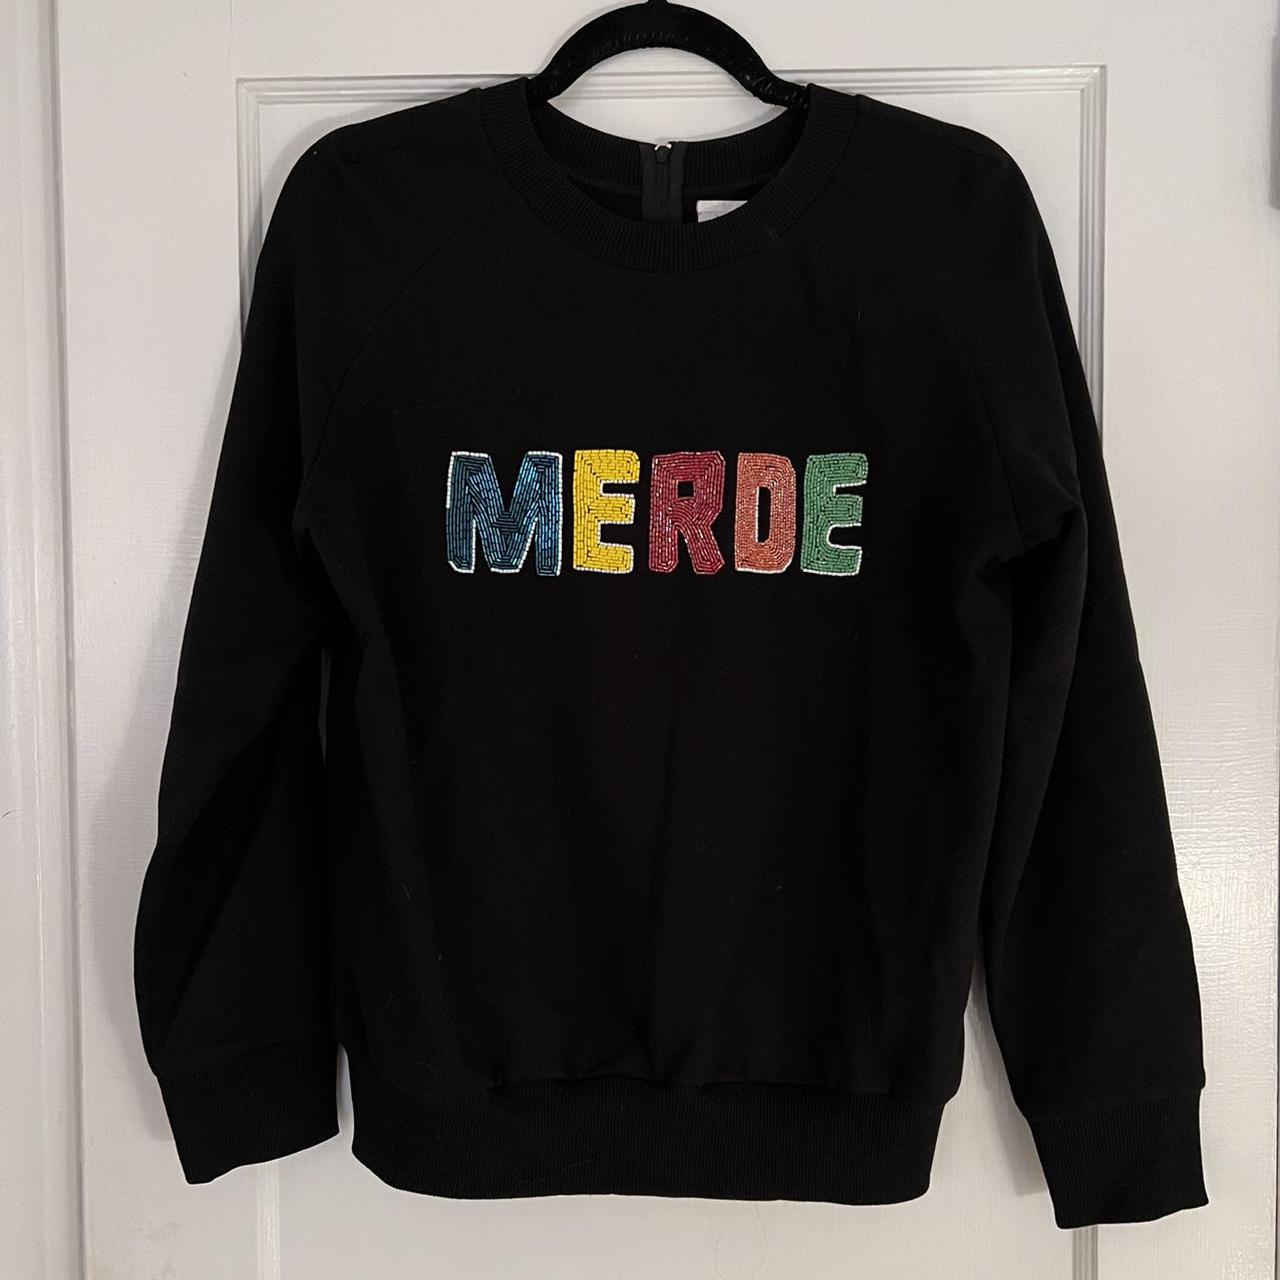 Product Image 1 - WORN ONCE ASHISH “Merde” pullover.